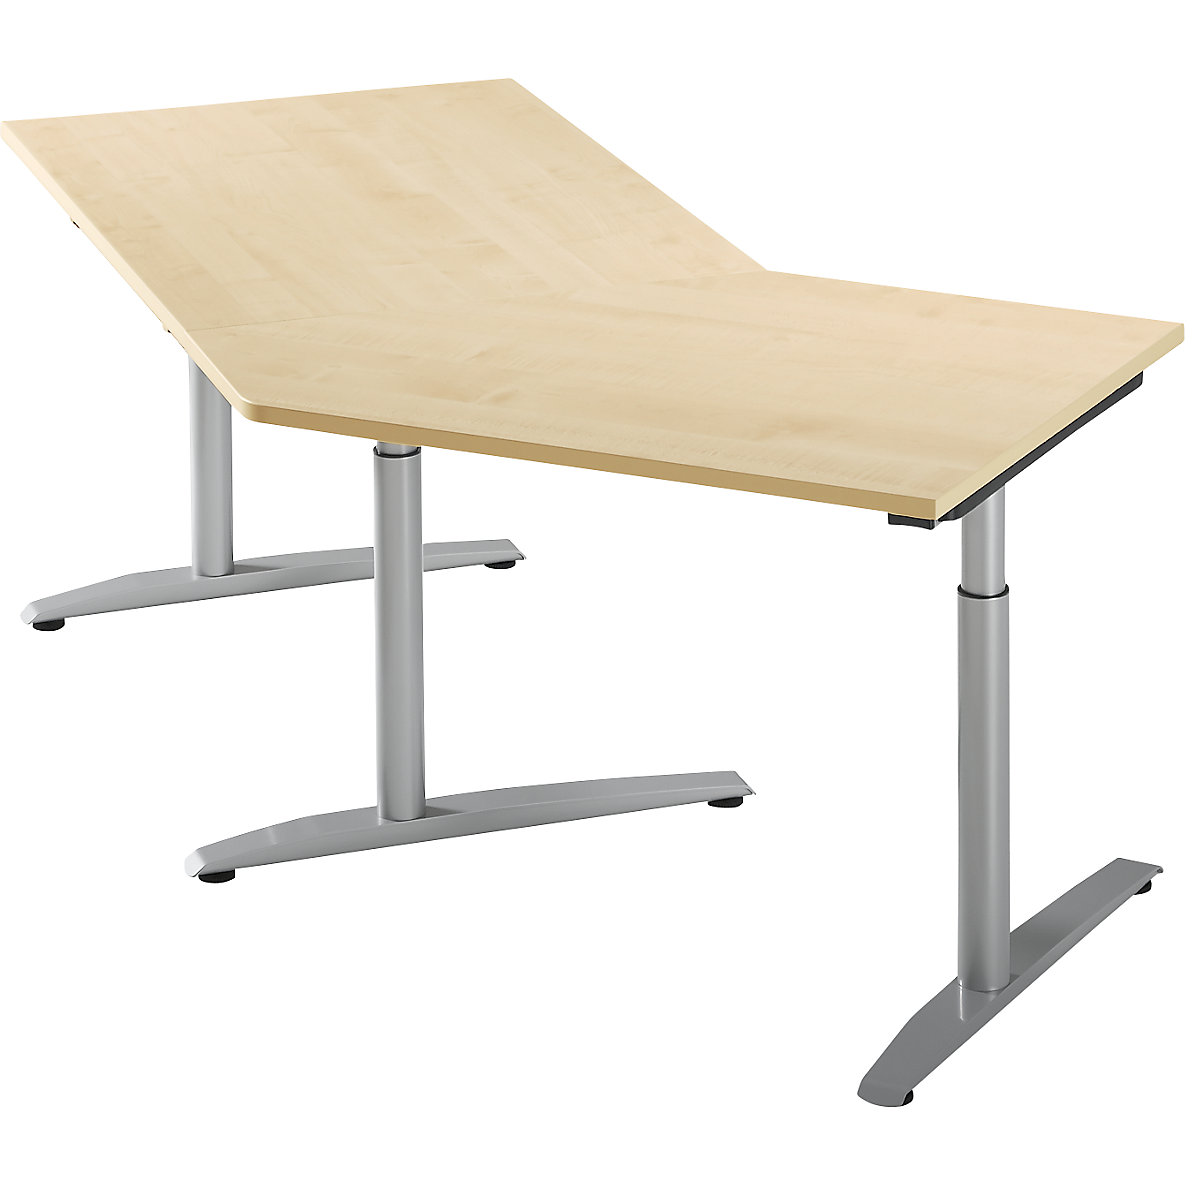 Add-on table, height adjustable from 650 – 850 mm HANNA